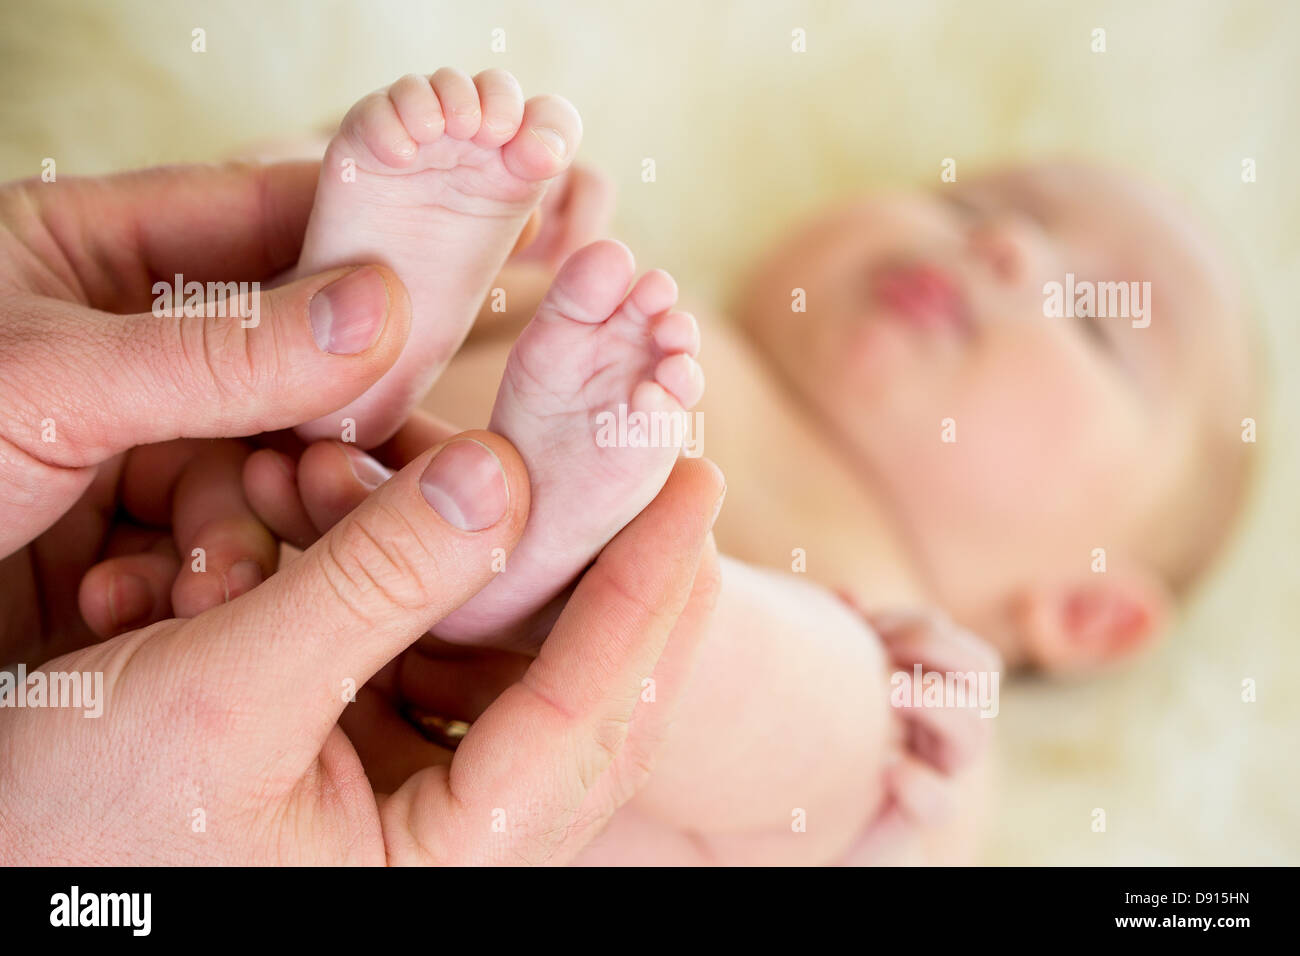 male hands massaging small baby feet Stock Photo